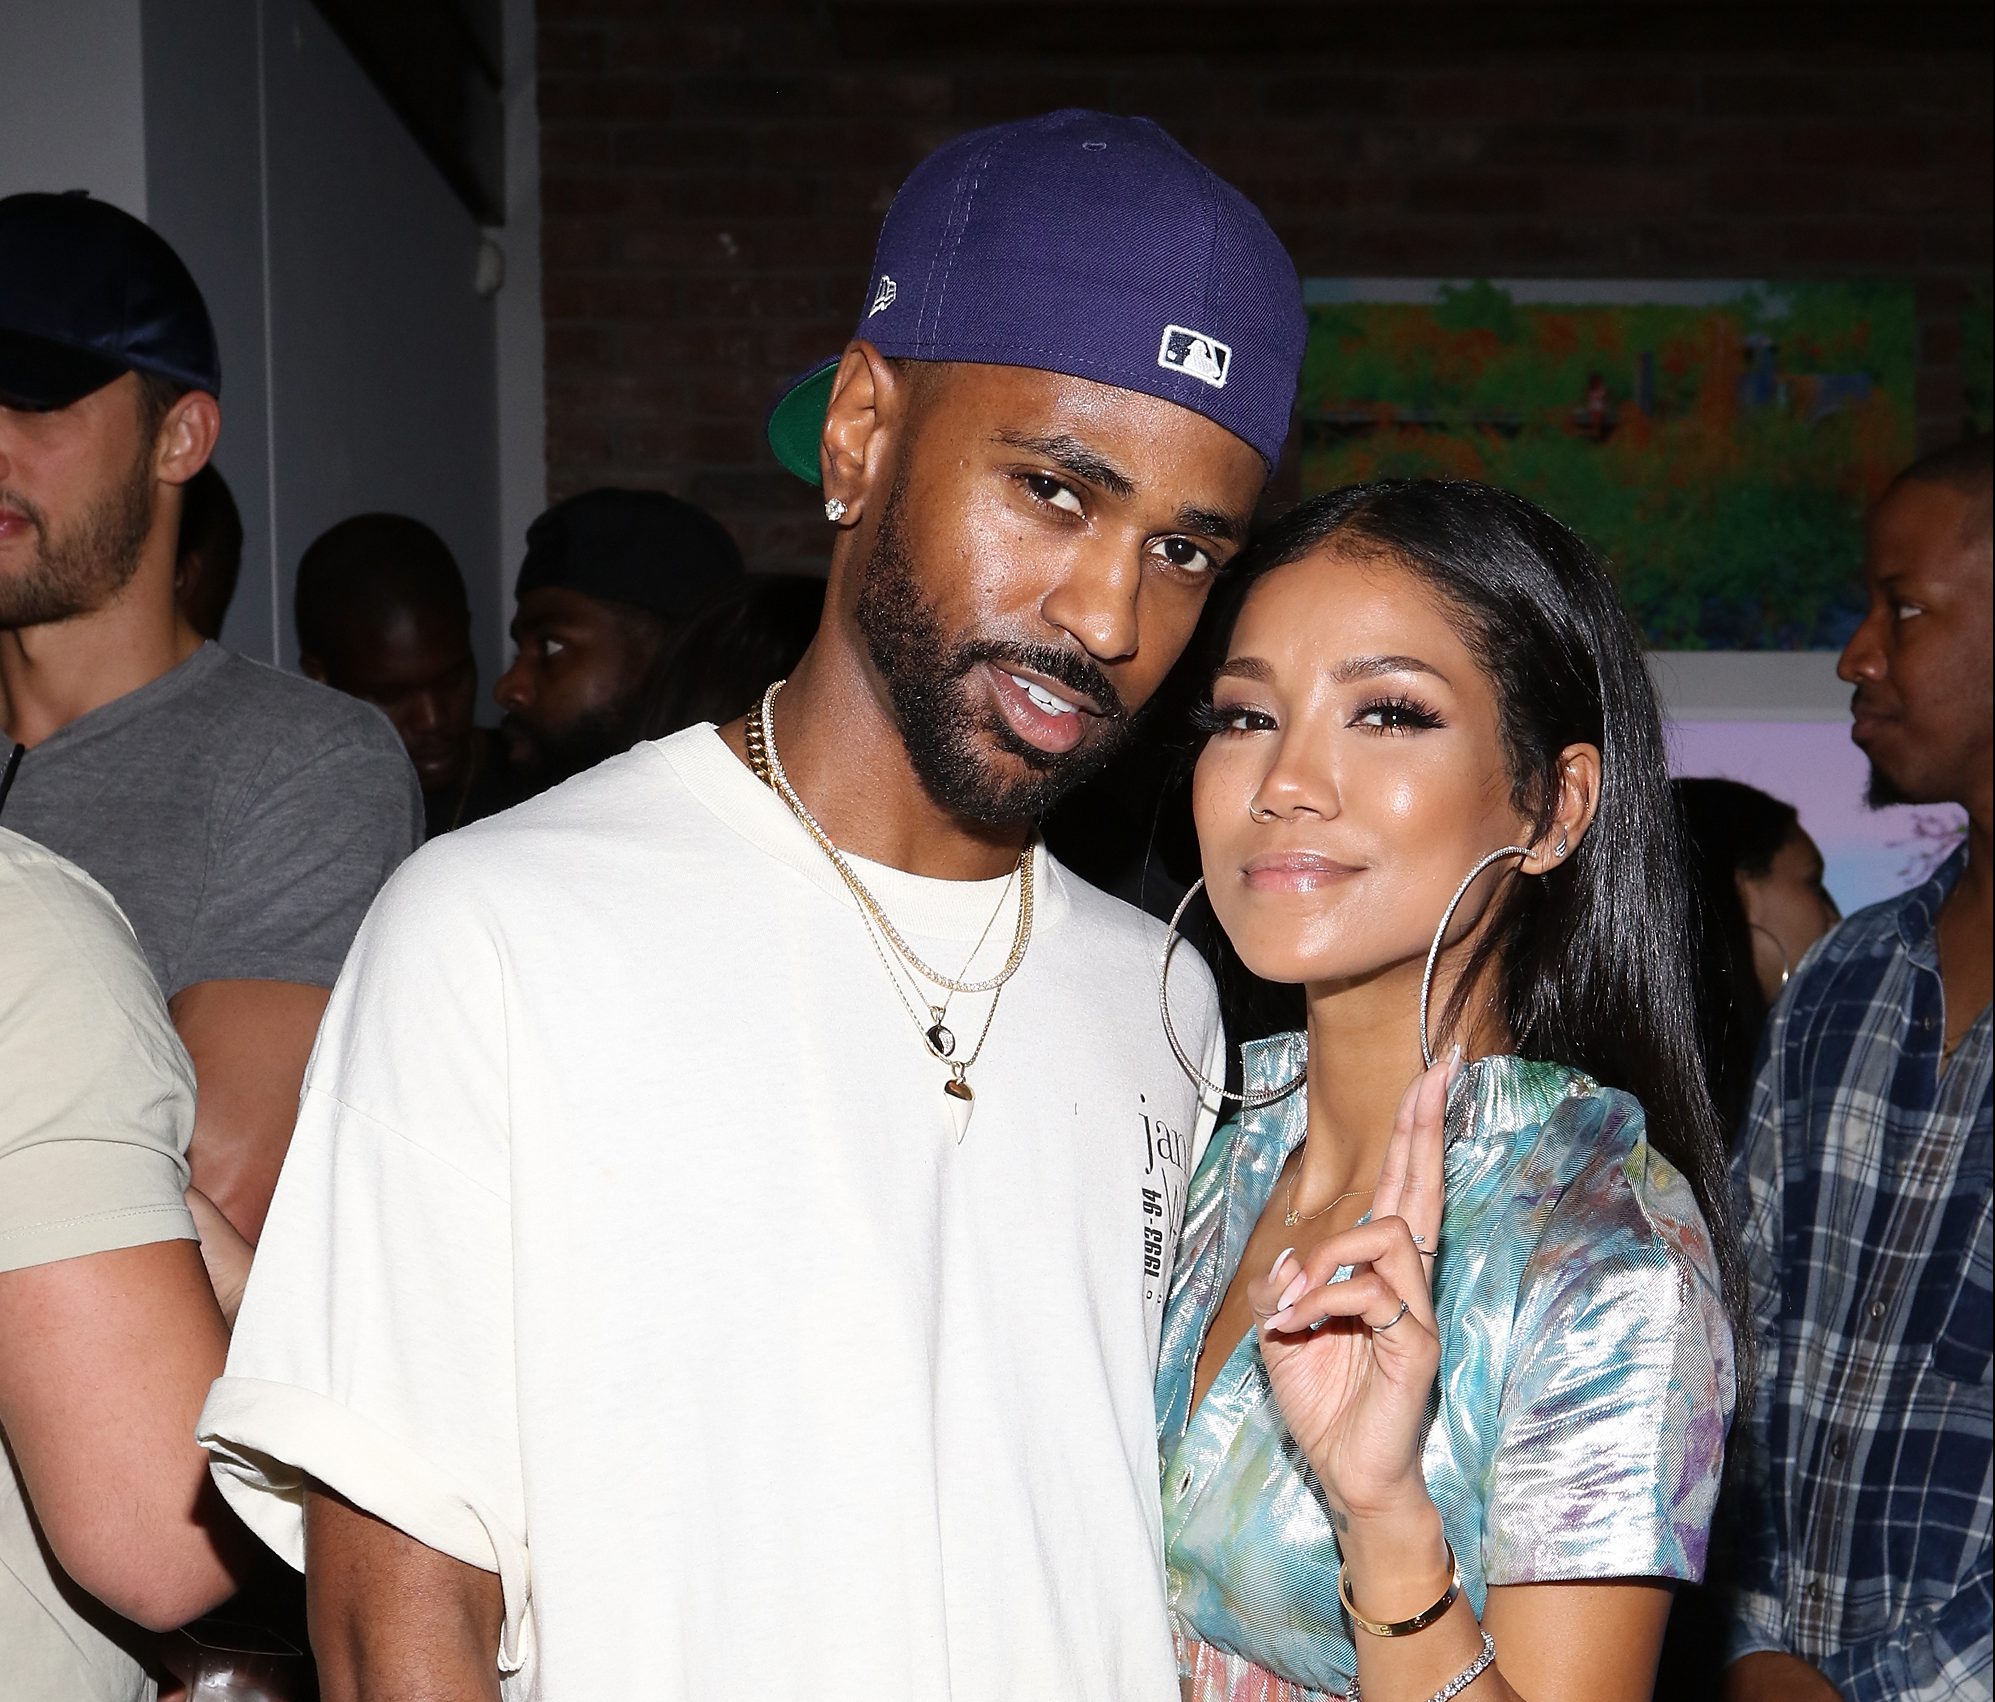 Jhené Aiko Tattoos Big Seans Face on Arm A Week After Finalizing Divorce   EURweb